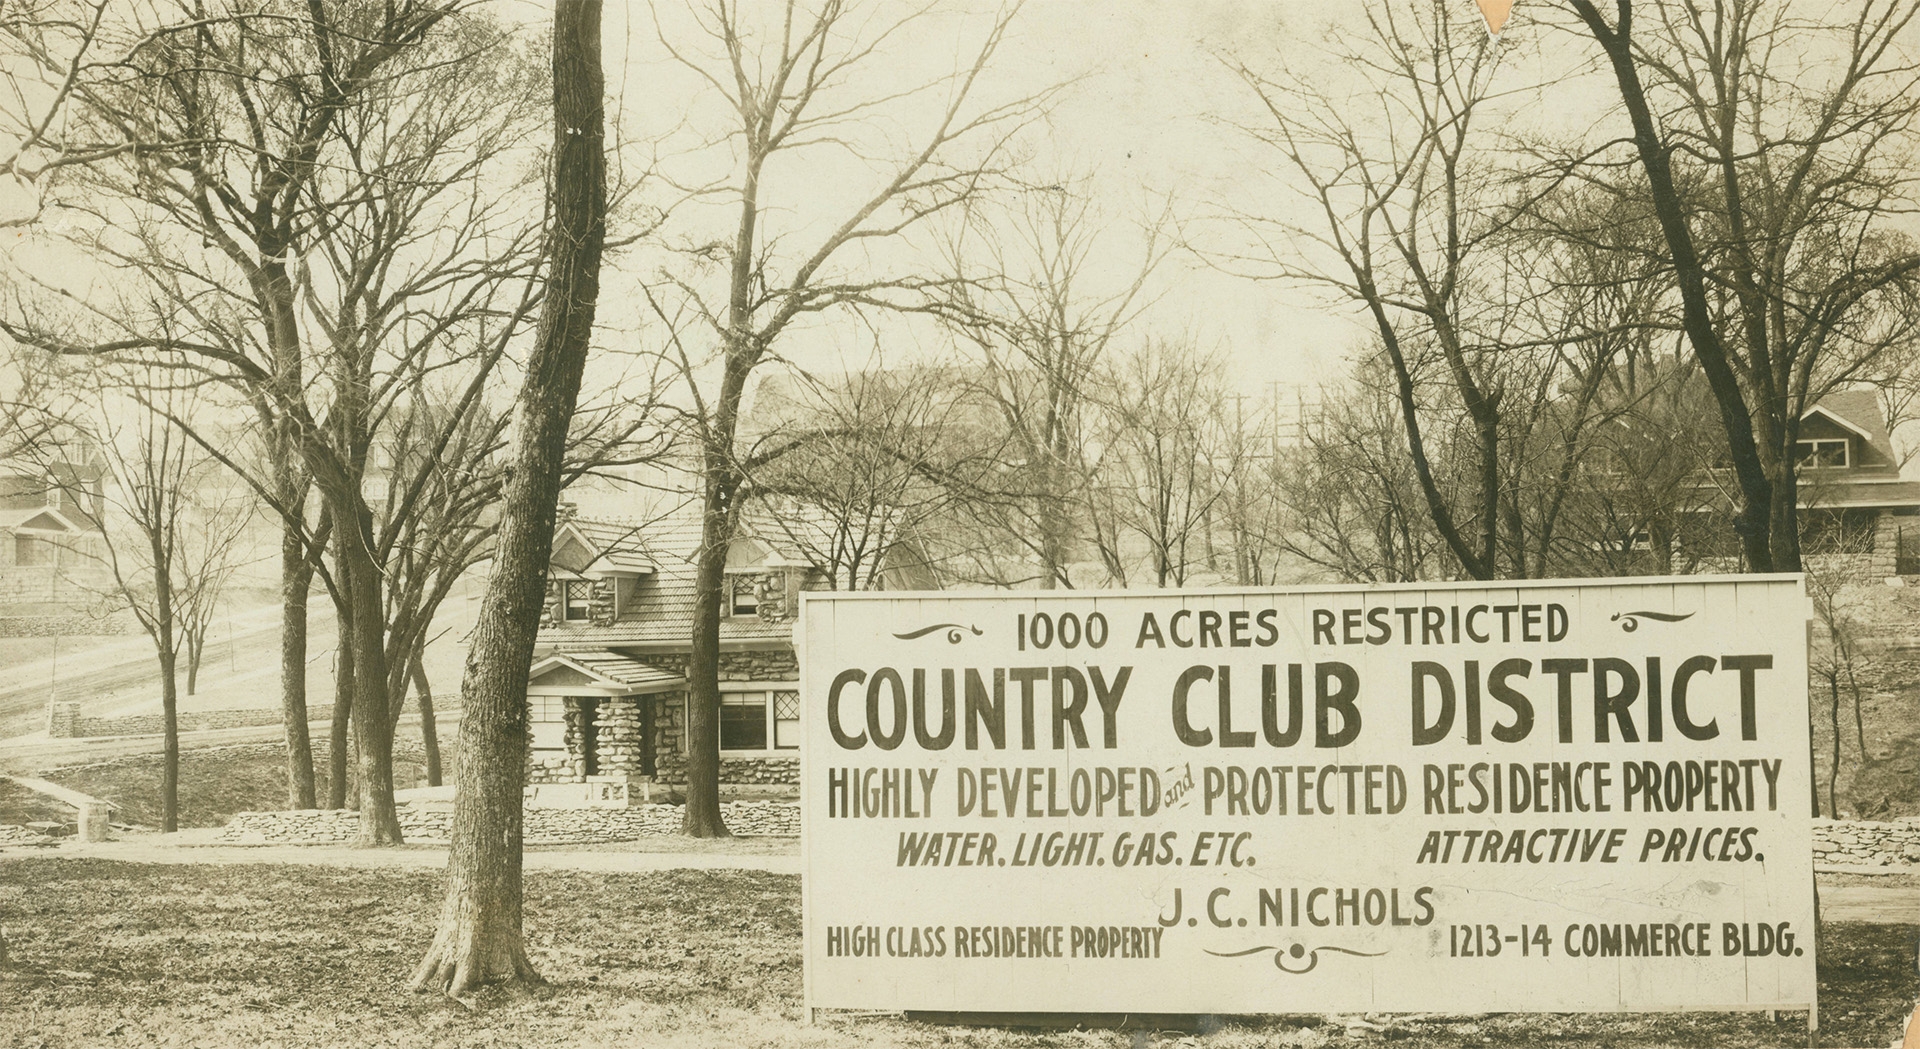 A J.C. Nichols Company real estate sign in Kansas City, Missouri reads: “1000 Acres Restricted;" “Country Club District;” “Highly Developed and Protected Residence Property;” “Water, Light, Gas, Etc. Attractive Prices."